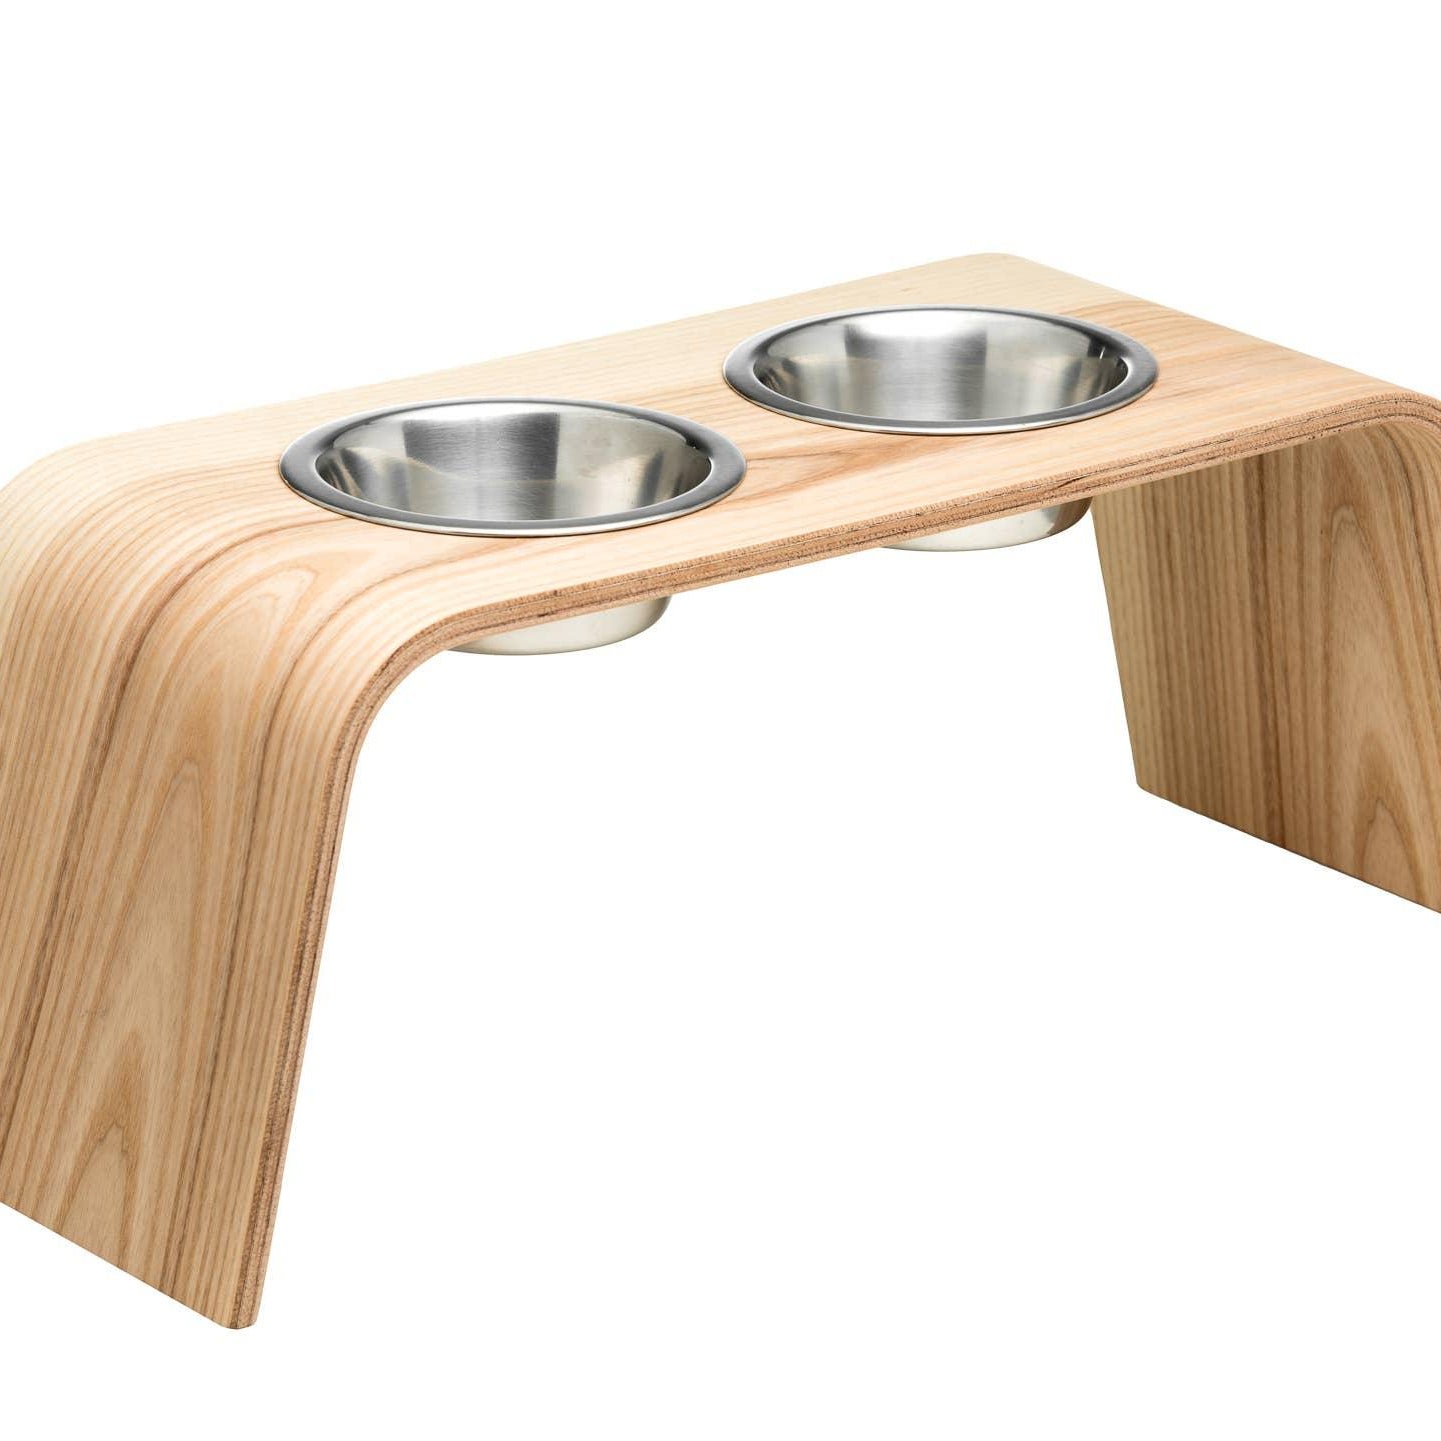 Wooden Elevated Stand for cats and dogs: Ash tree / 44x17x10 cm - Rocky & Maggie's Pet Boutique and Salon